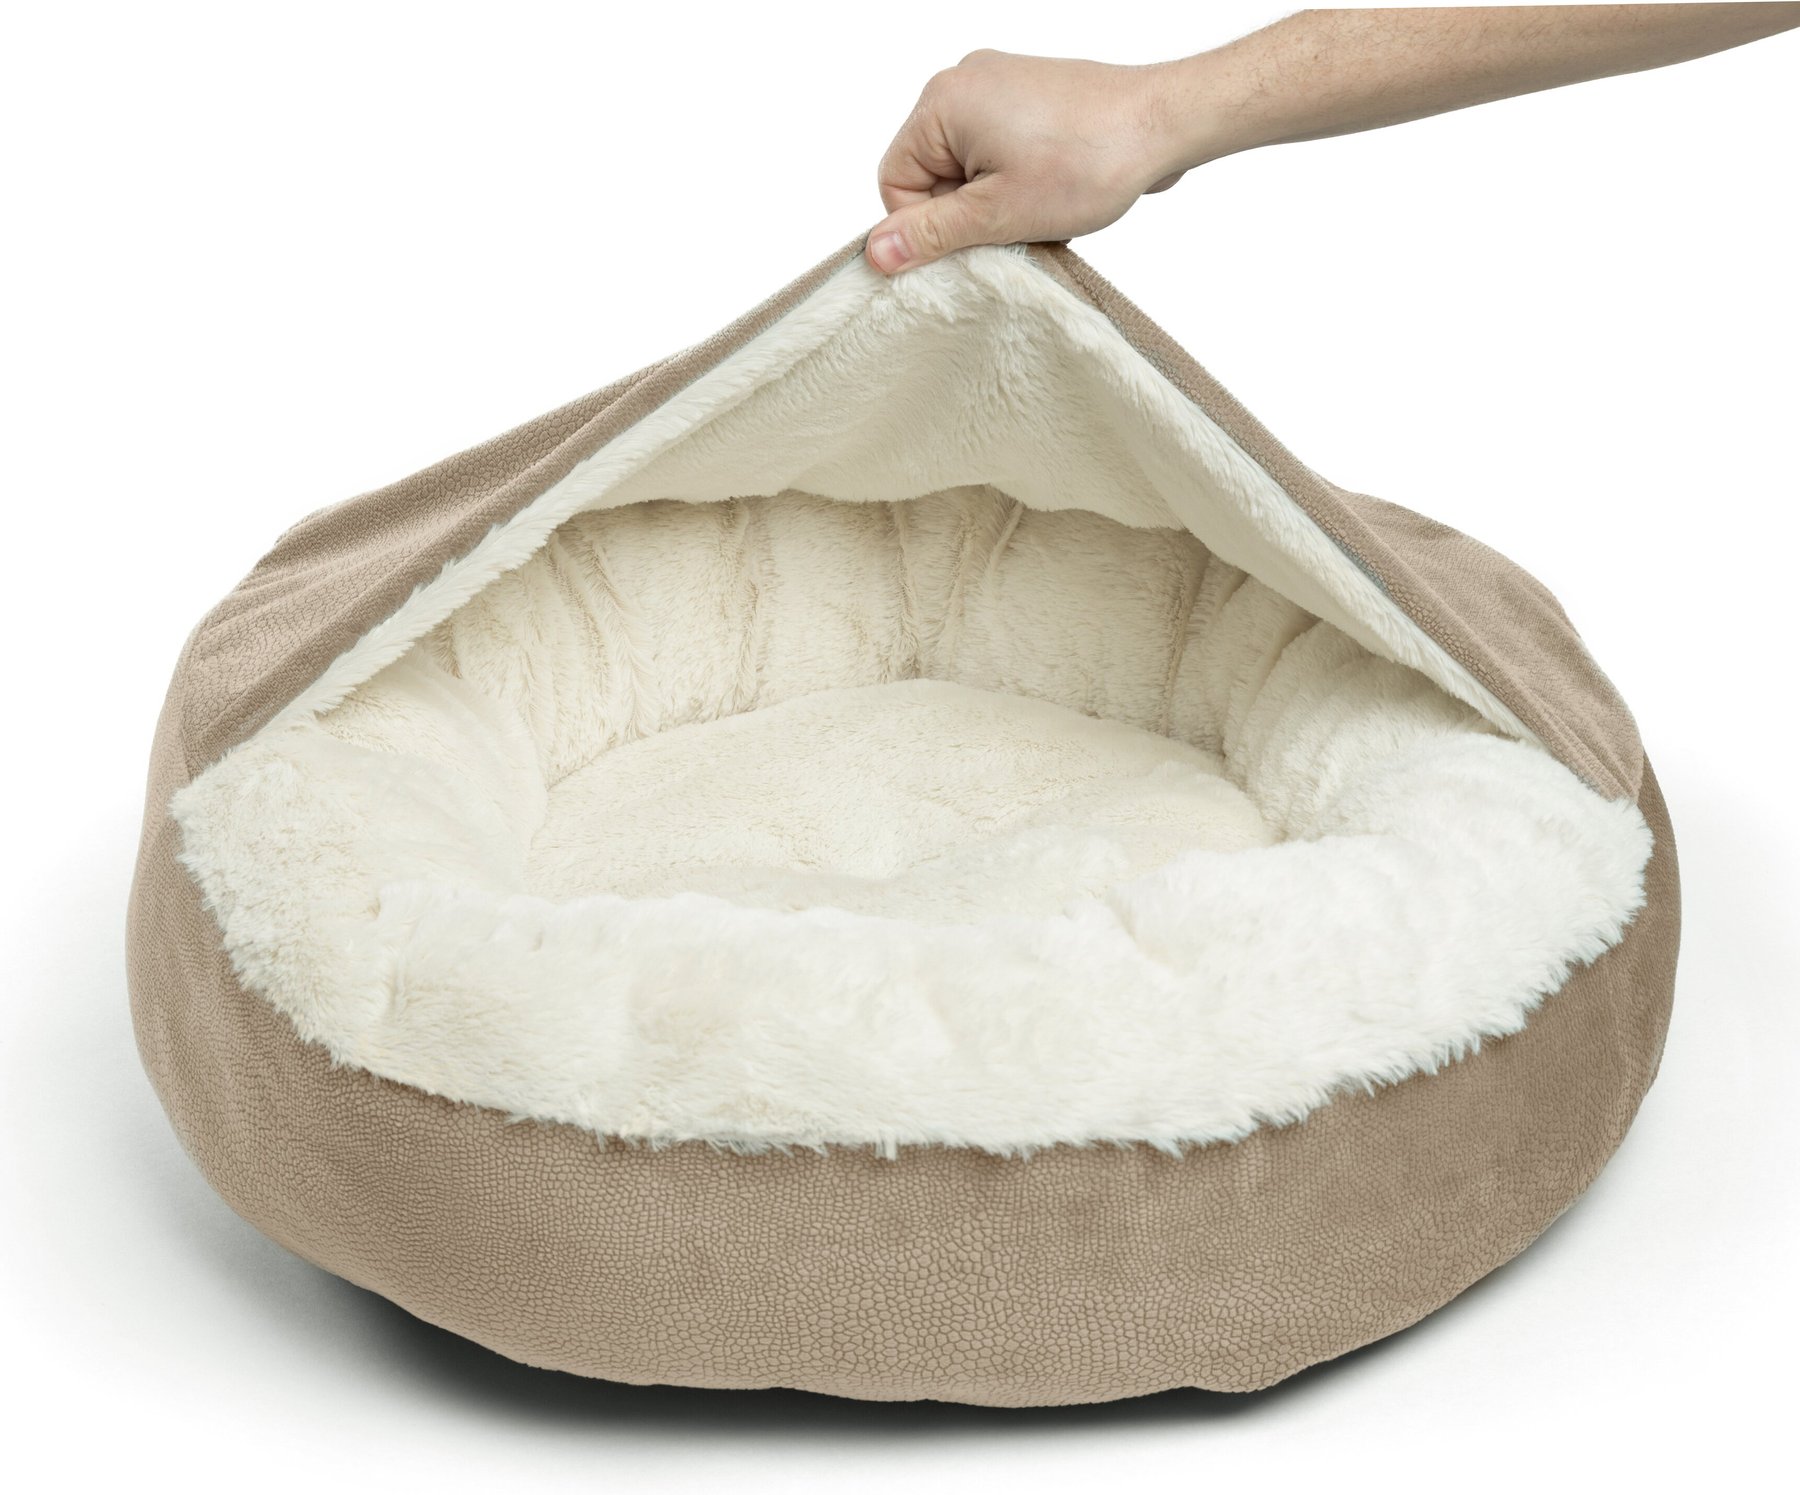 Large Dog Bed Ideal for Small Medium Dogs Cozy Cuddler with Comfortable Bolster Grooved Nonslip Pet Bed with Hook and Loop Machine Washable  Petsure Dog Bed Brown  23.6x19.7x5.9